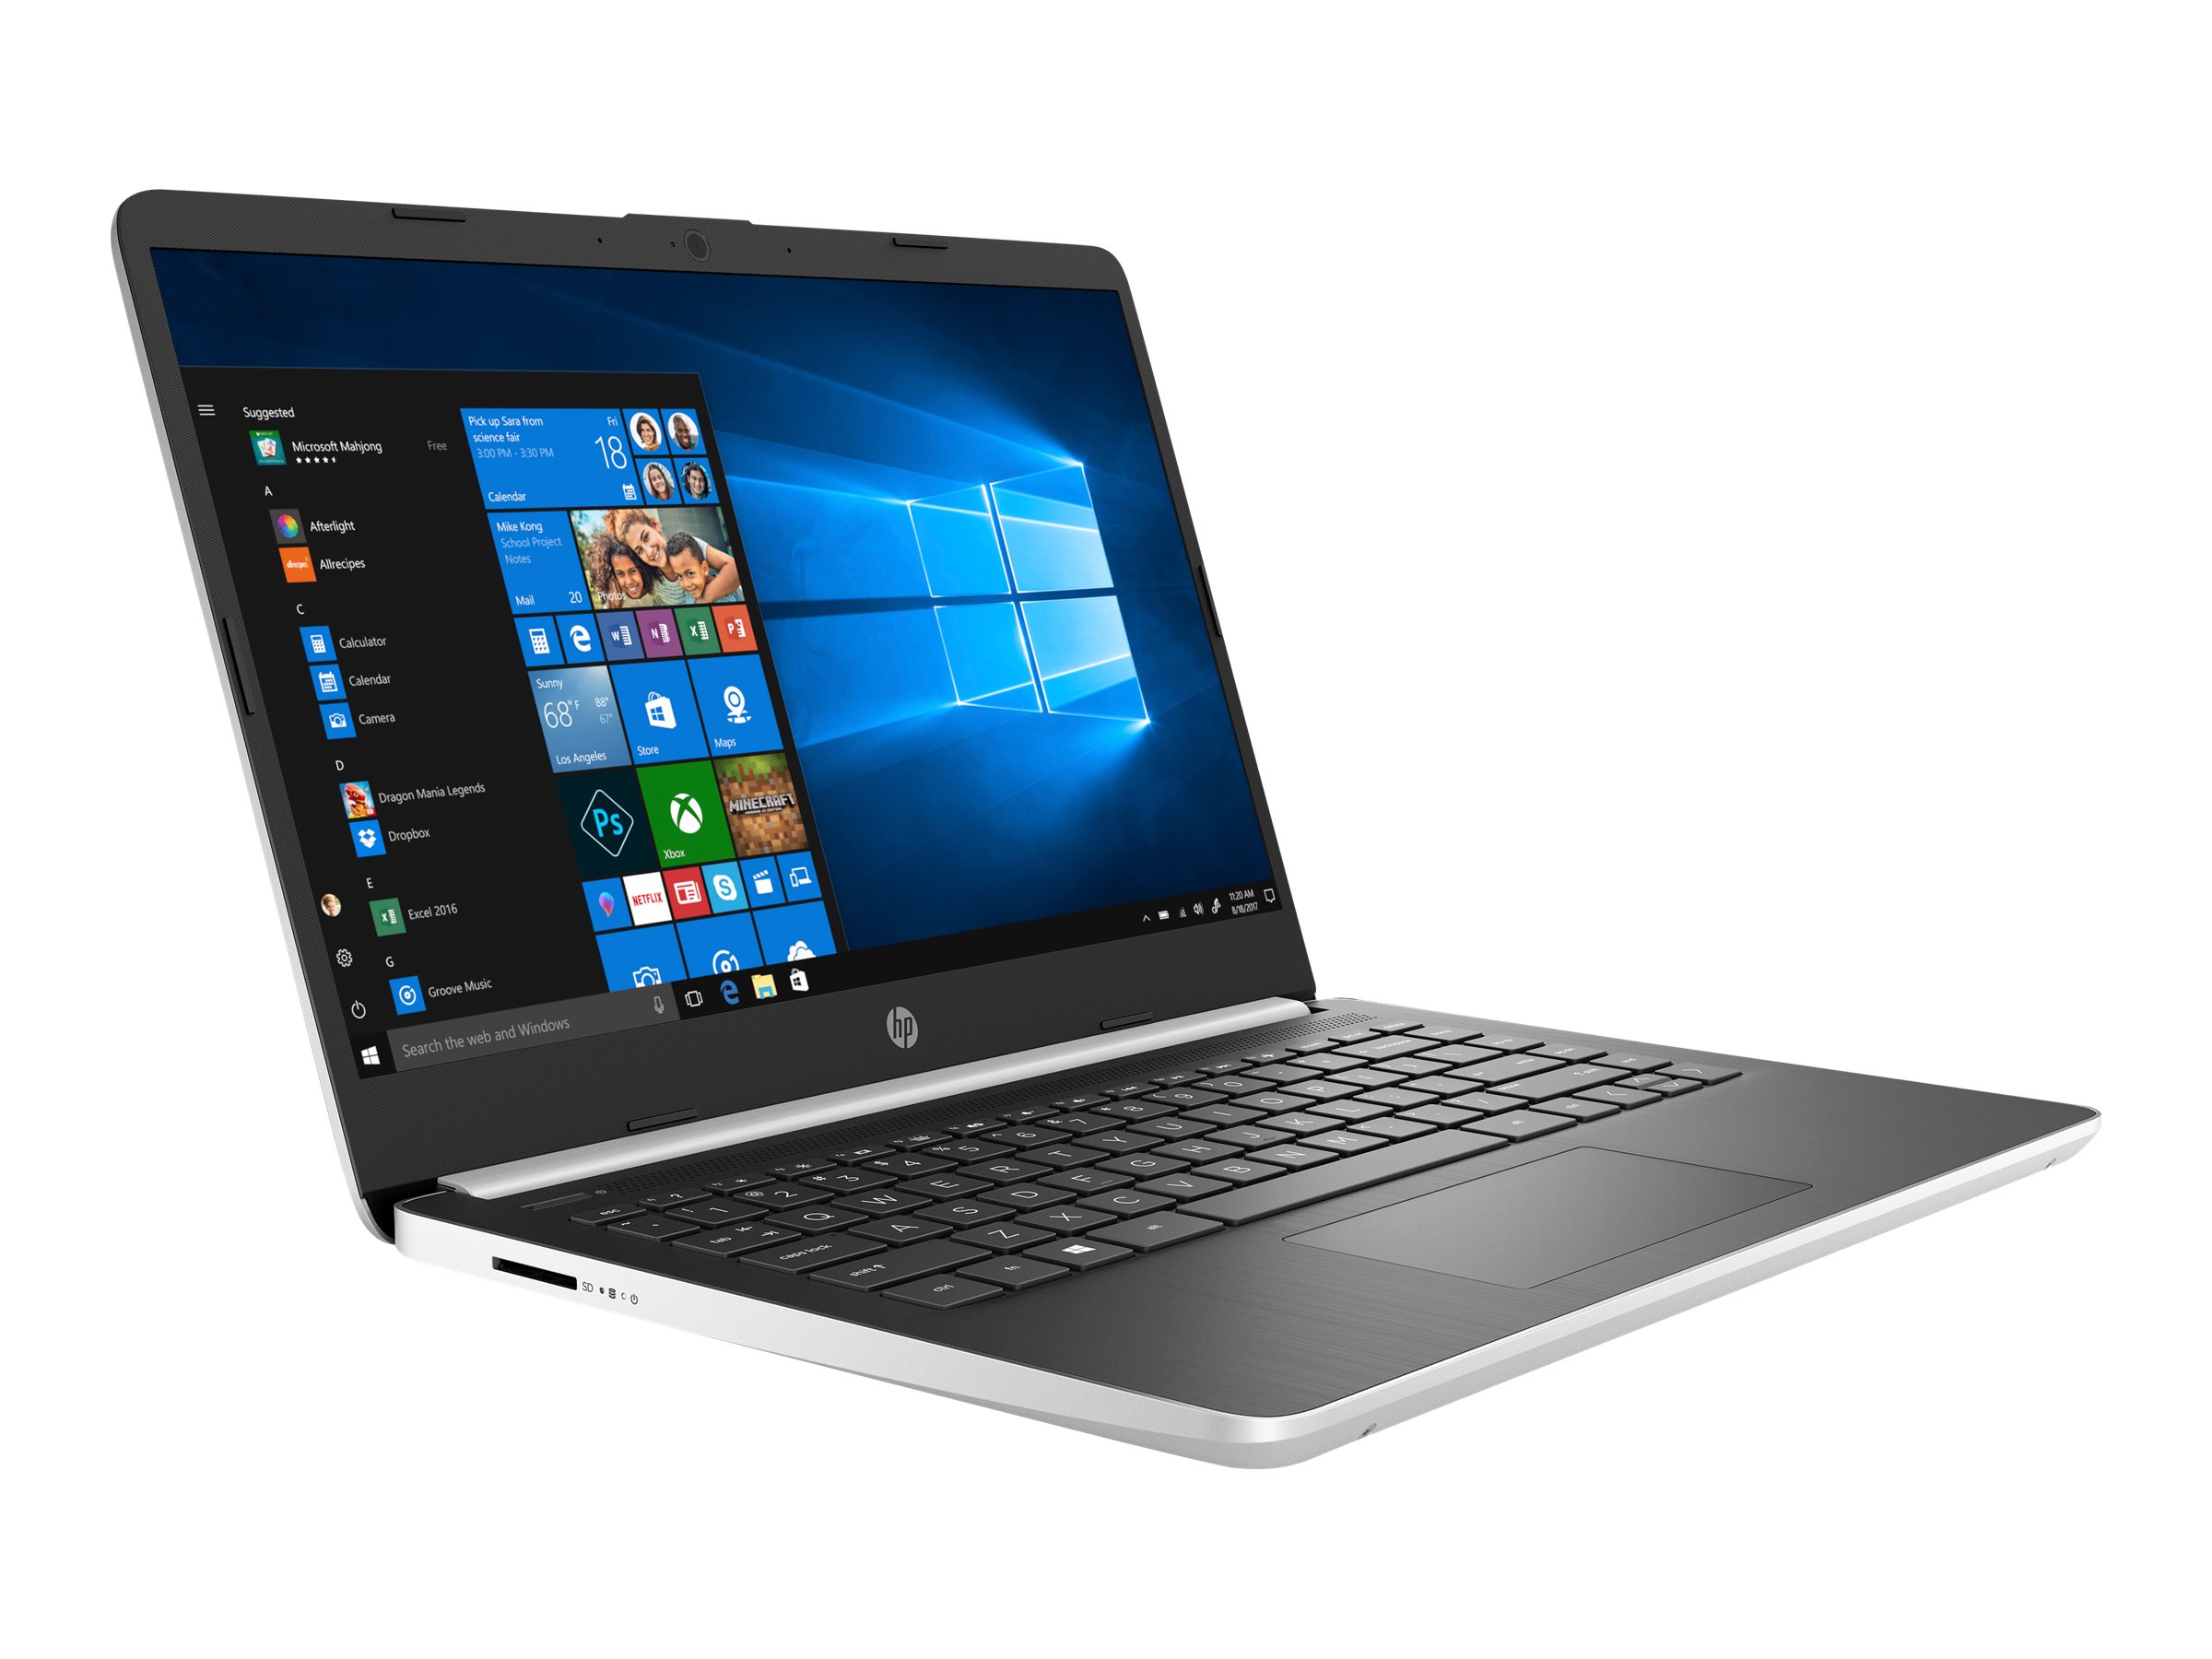 HP 14-dq1039wm 14" HD i5-1035G1 1.0GHz 8GB RAM 256GB SSD Win 10 Home Natural Silver - image 3 of 6